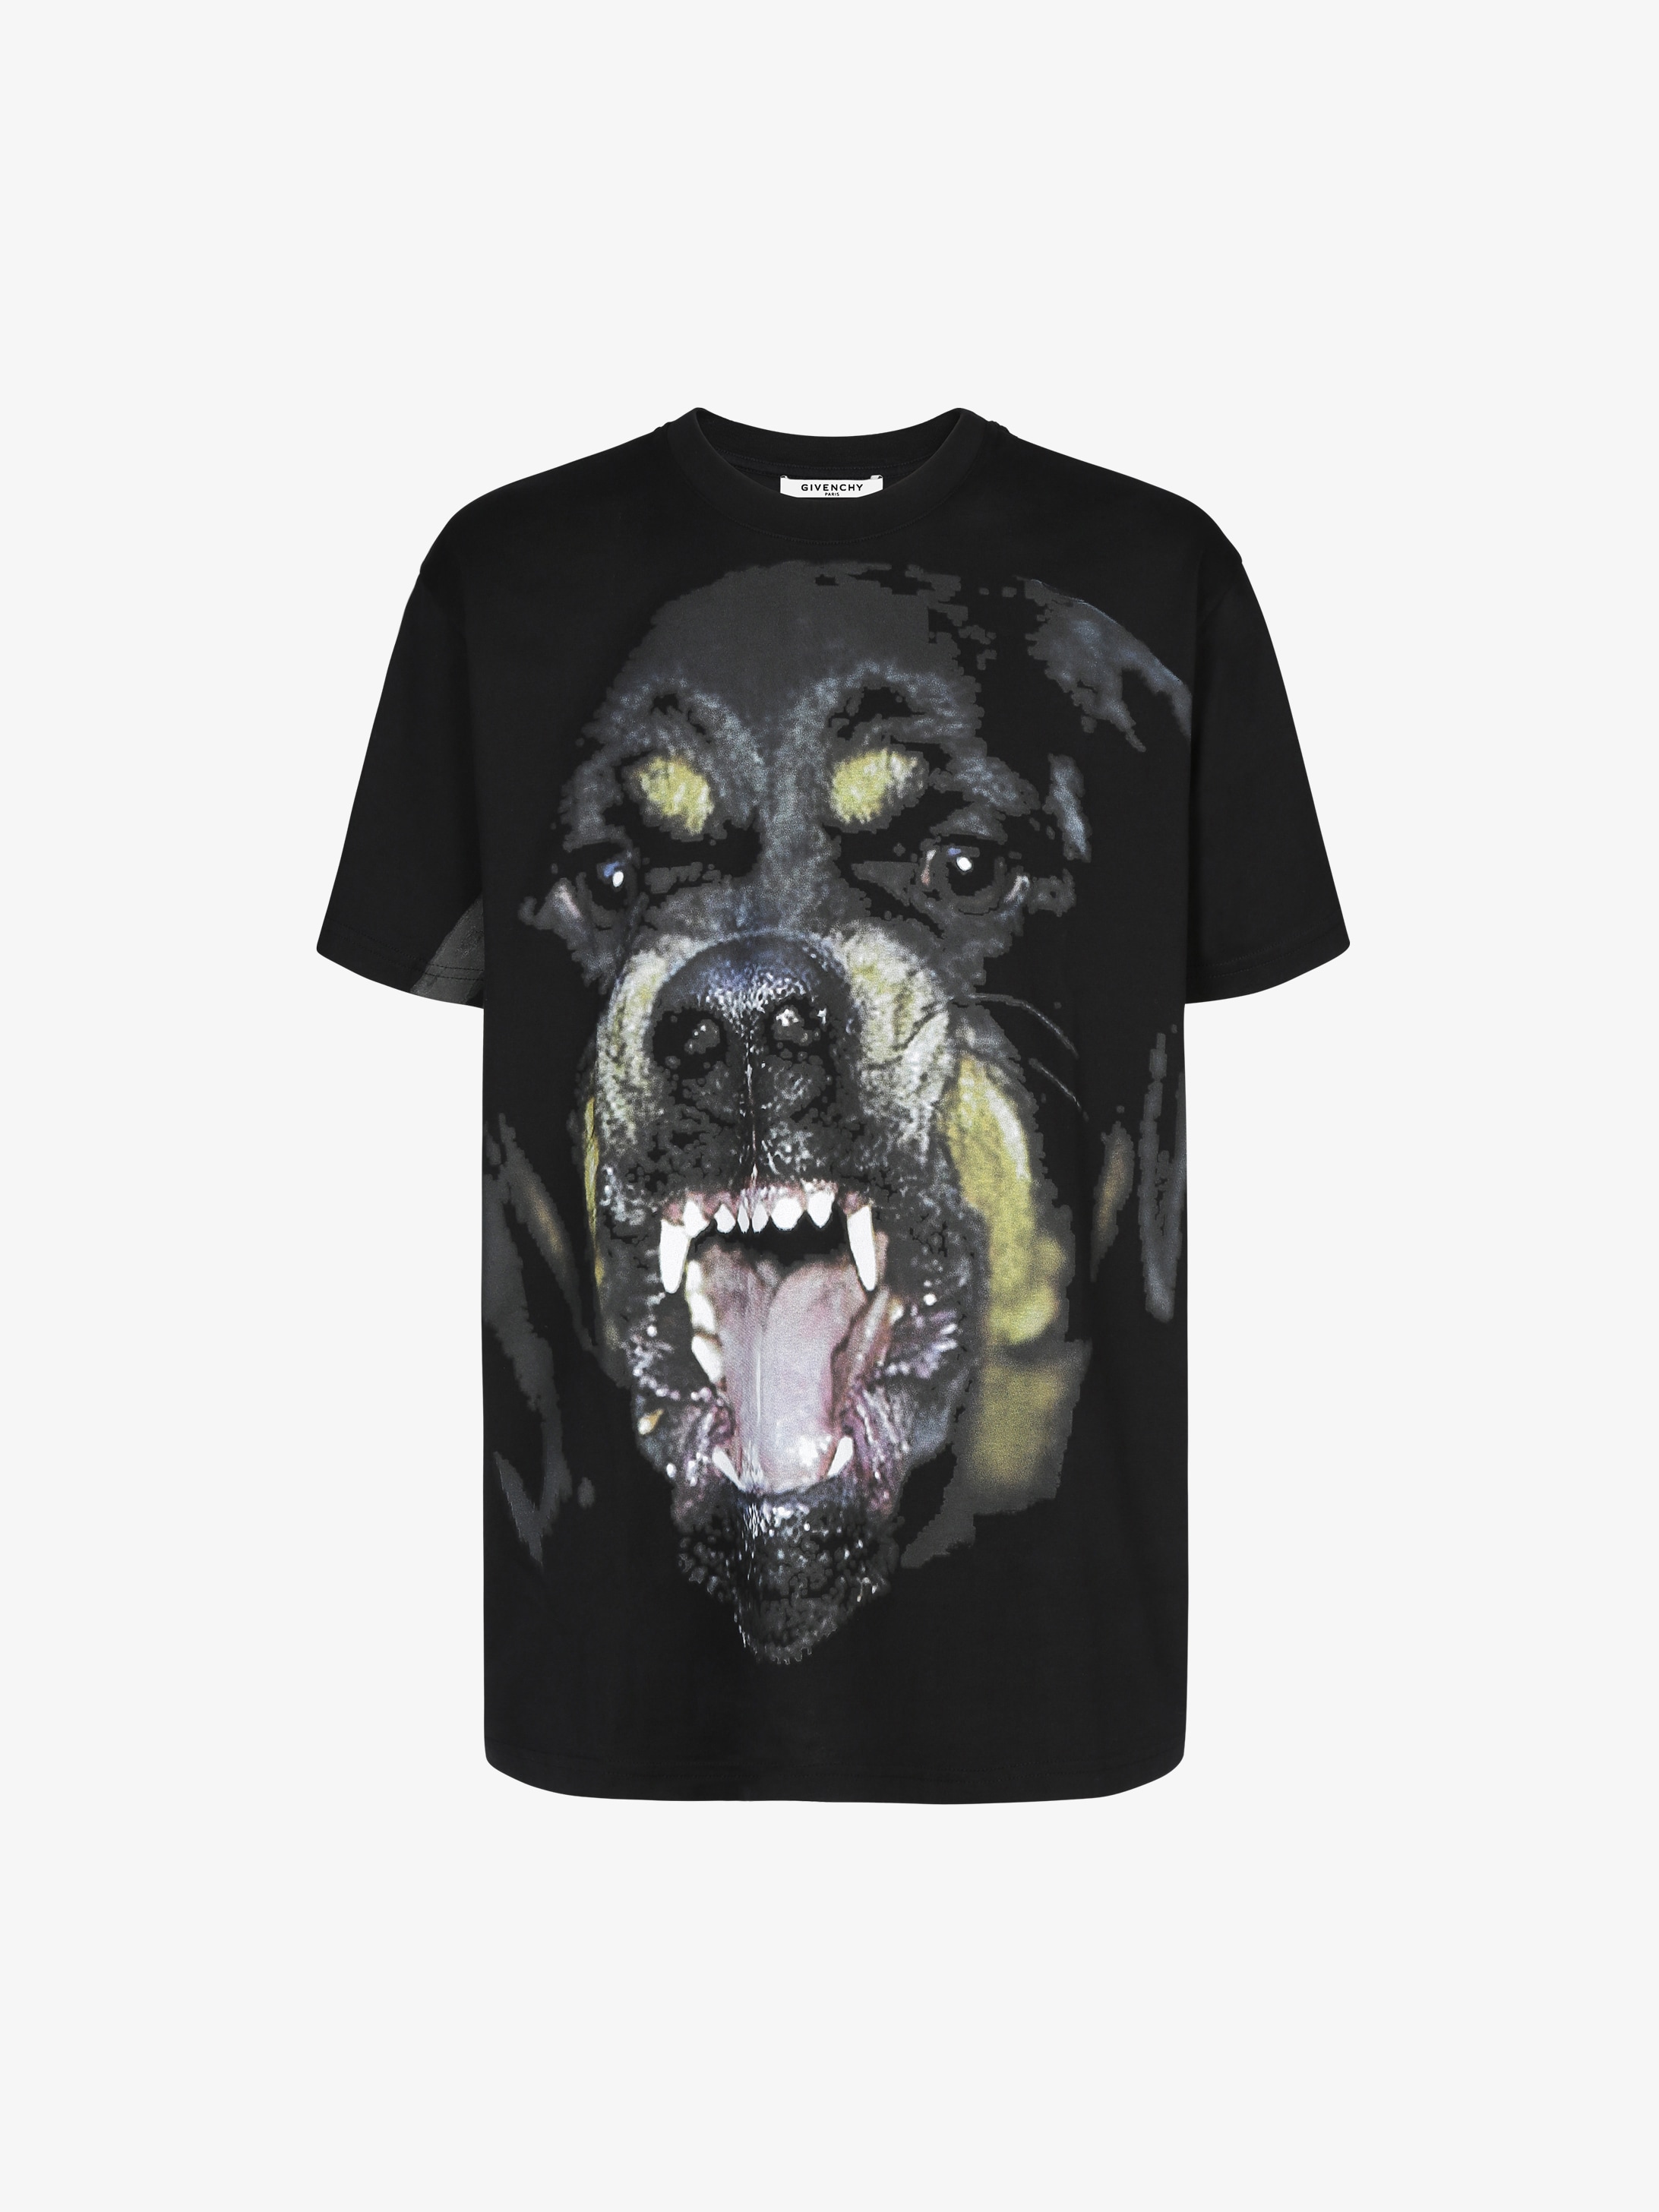 Rottweiler oversized printed t-shirt | GIVENCHY Paris